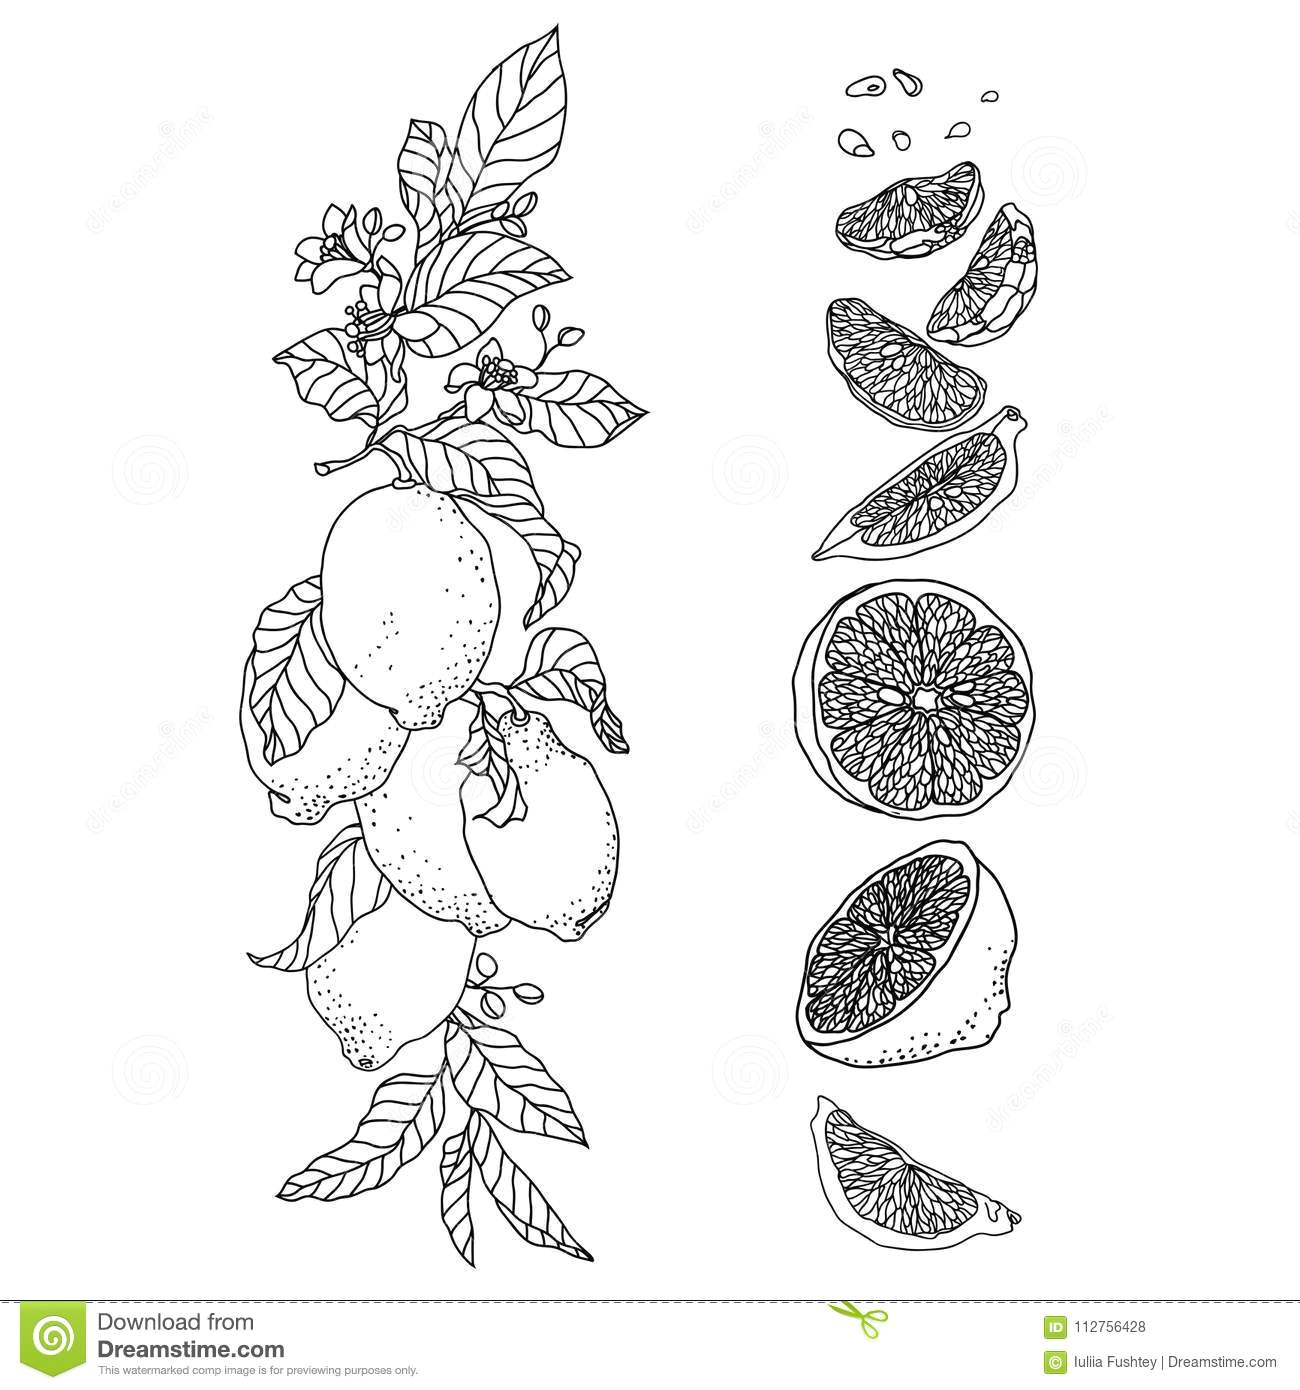 there are fruit flowers leaves buds seeds and branches set is made in vintage pen technique more similar stock illustrations